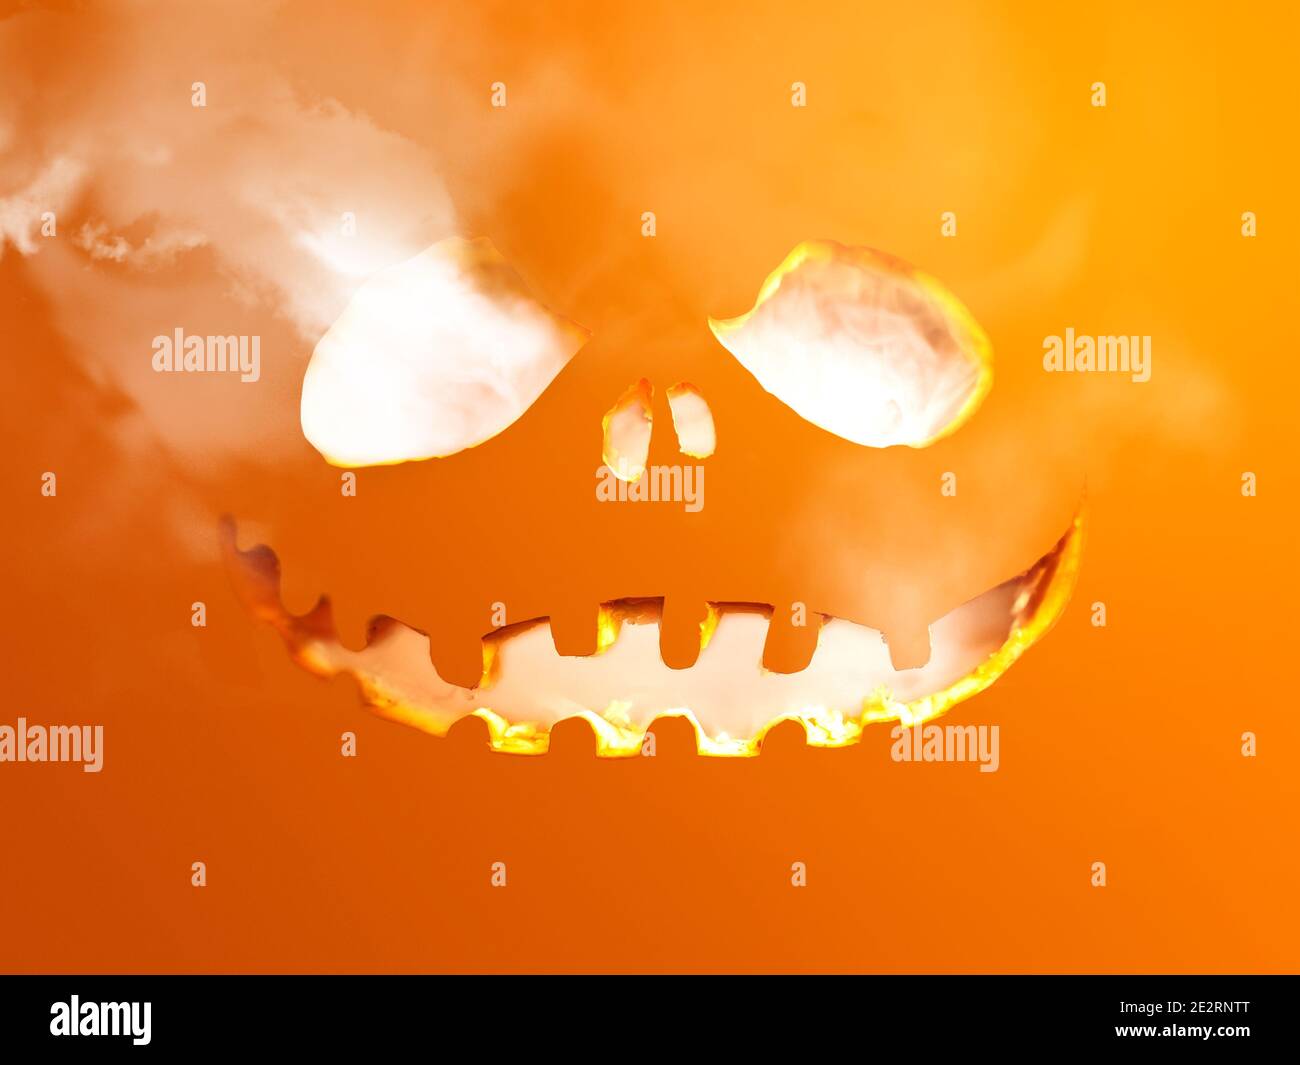 Halloween theme carved hole in a flat surface with smoke coming out. Stock Photo